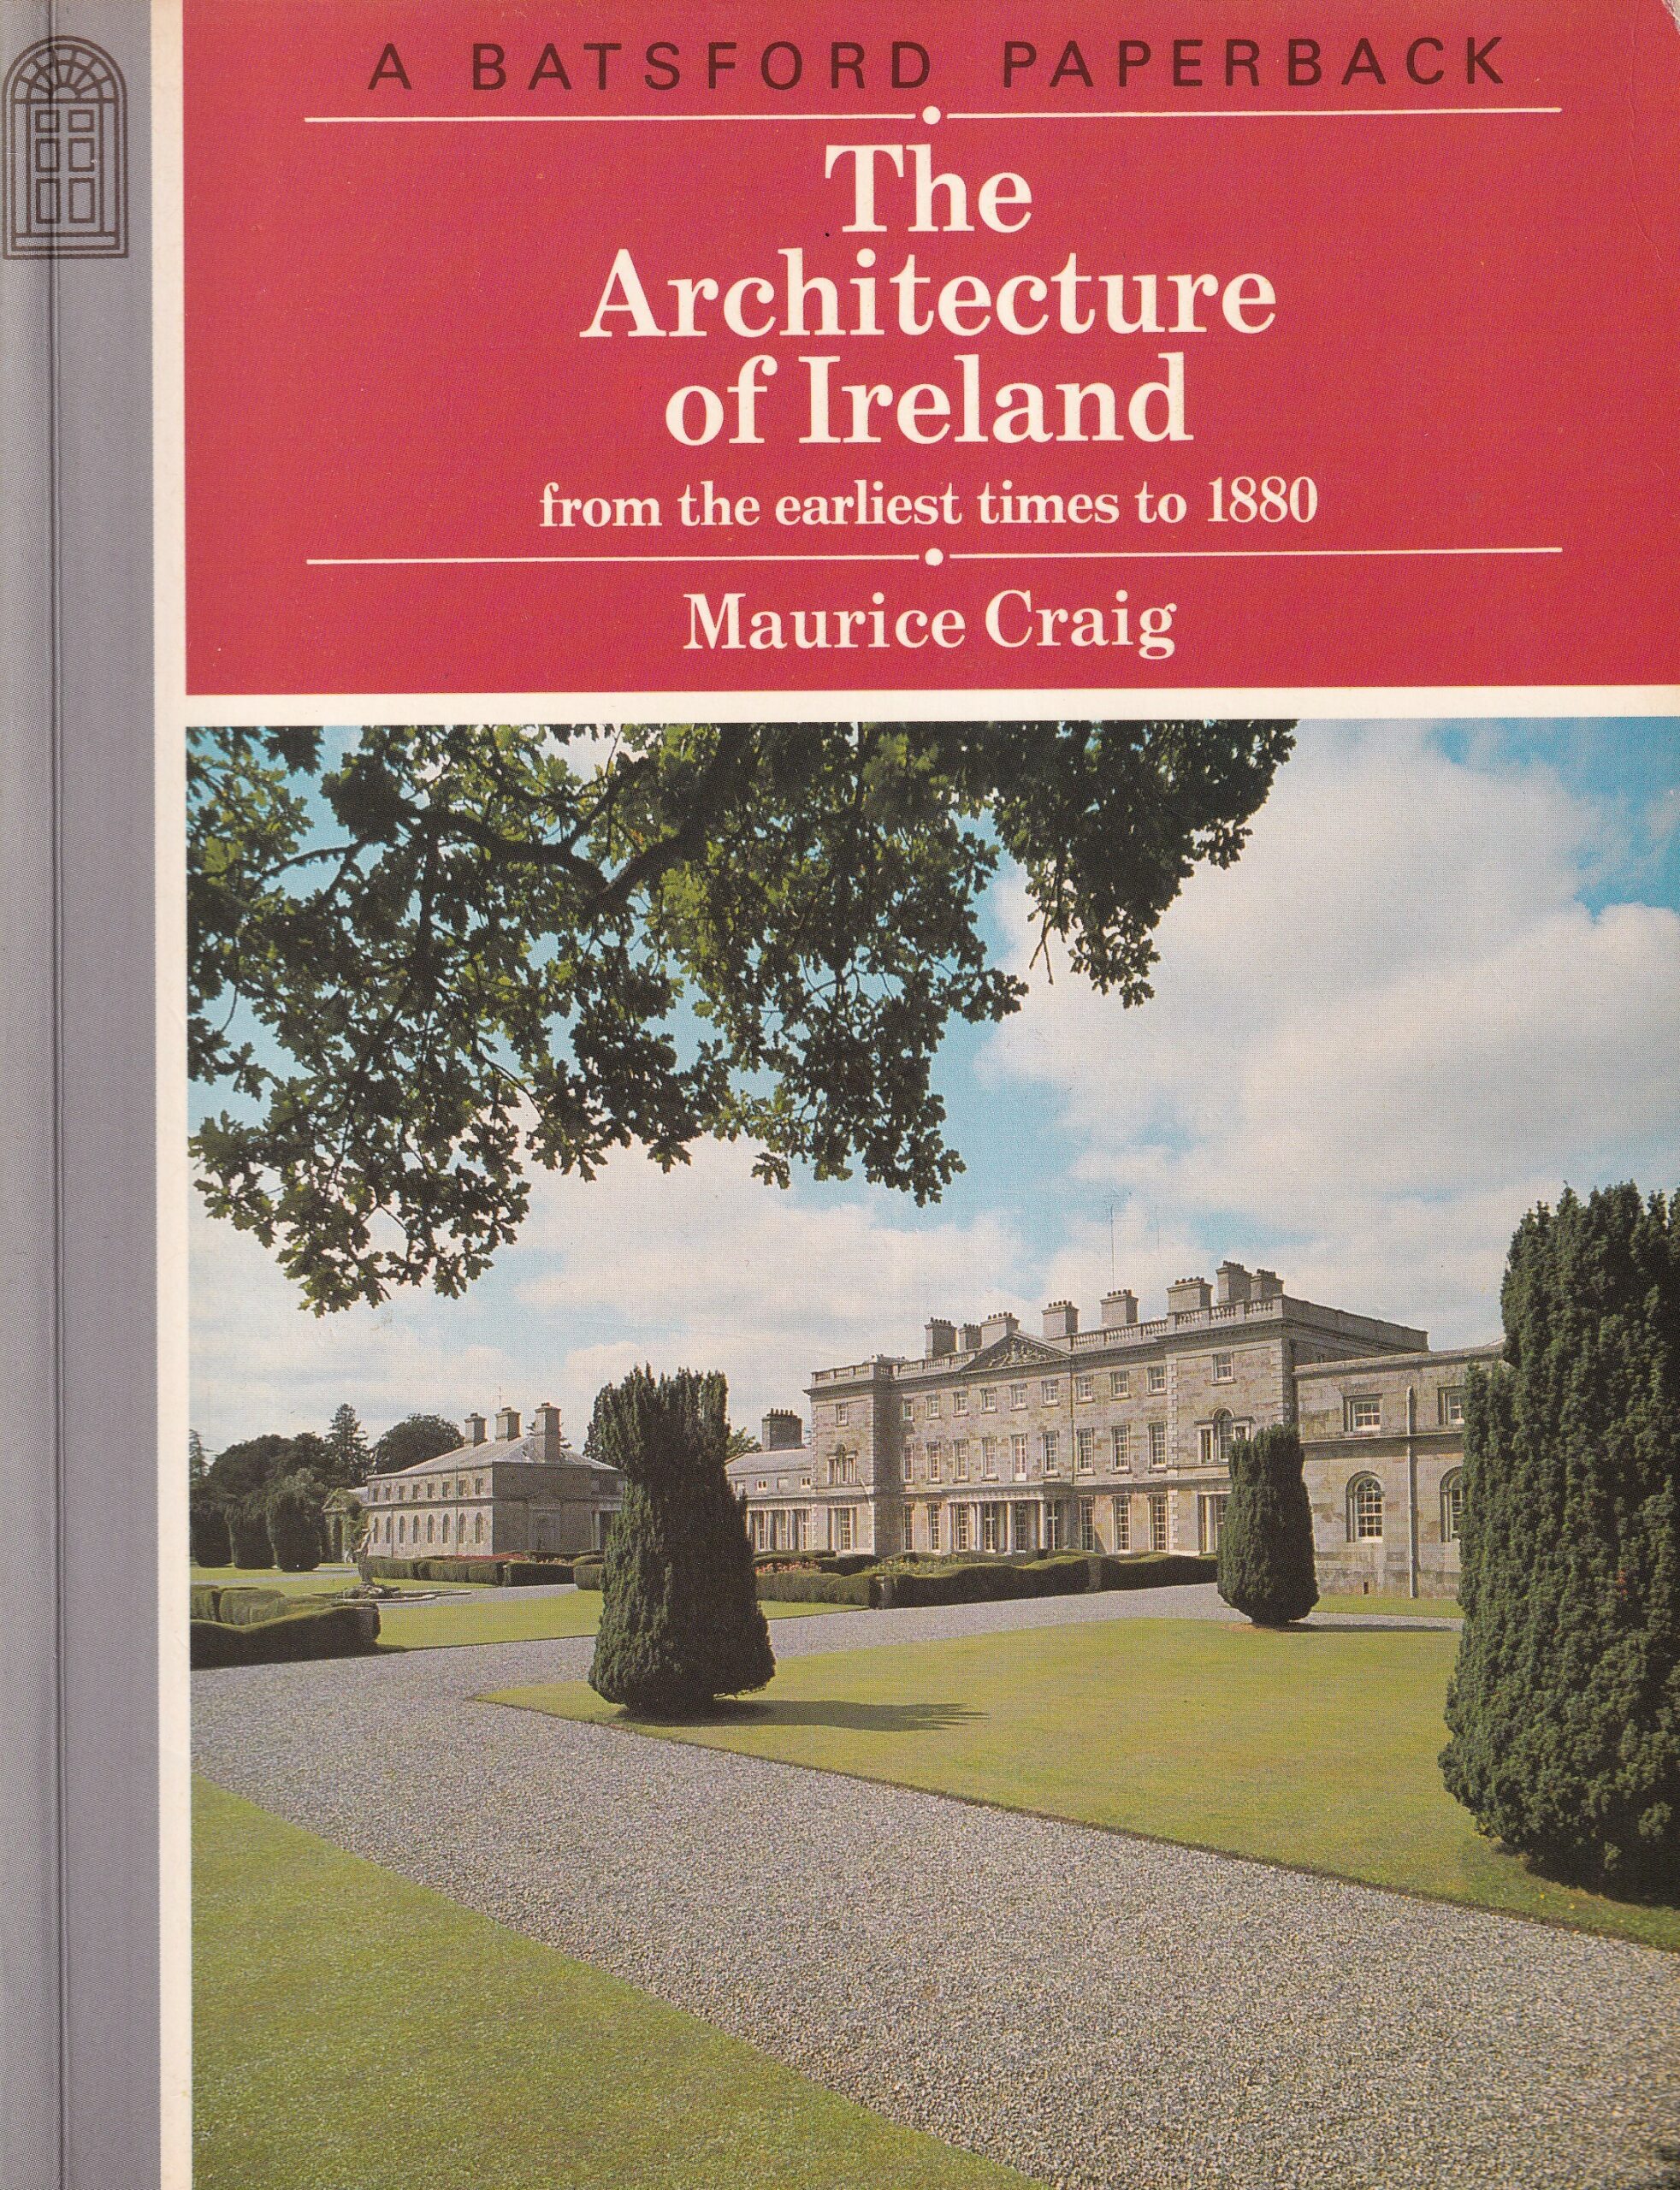 The Architecture of Ireland from the Earliest Times to 1880 by Maurice Craig